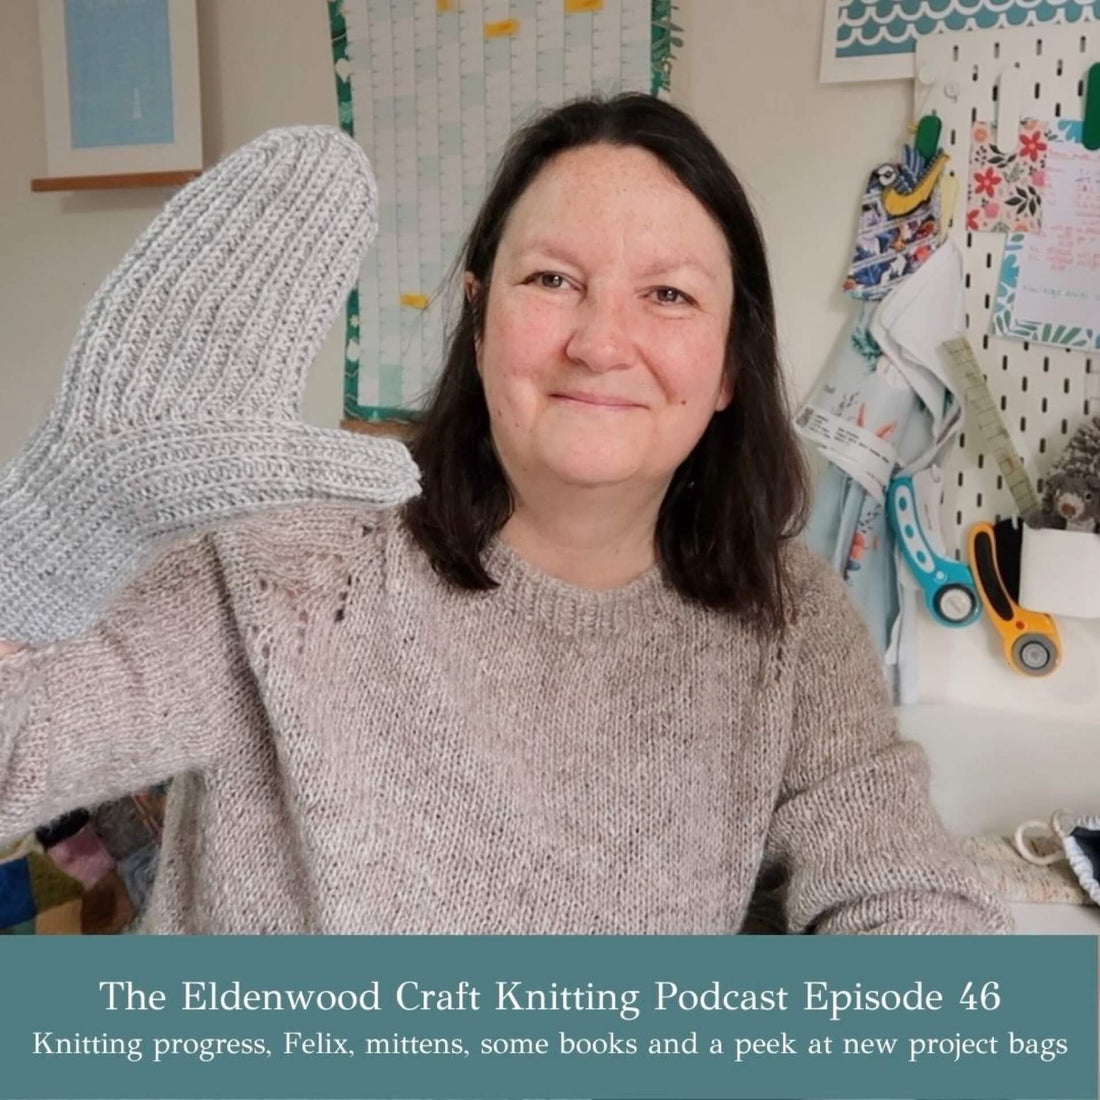 Emma shows off a handknit mitten whilst recording the latest episode of her knitting podcast